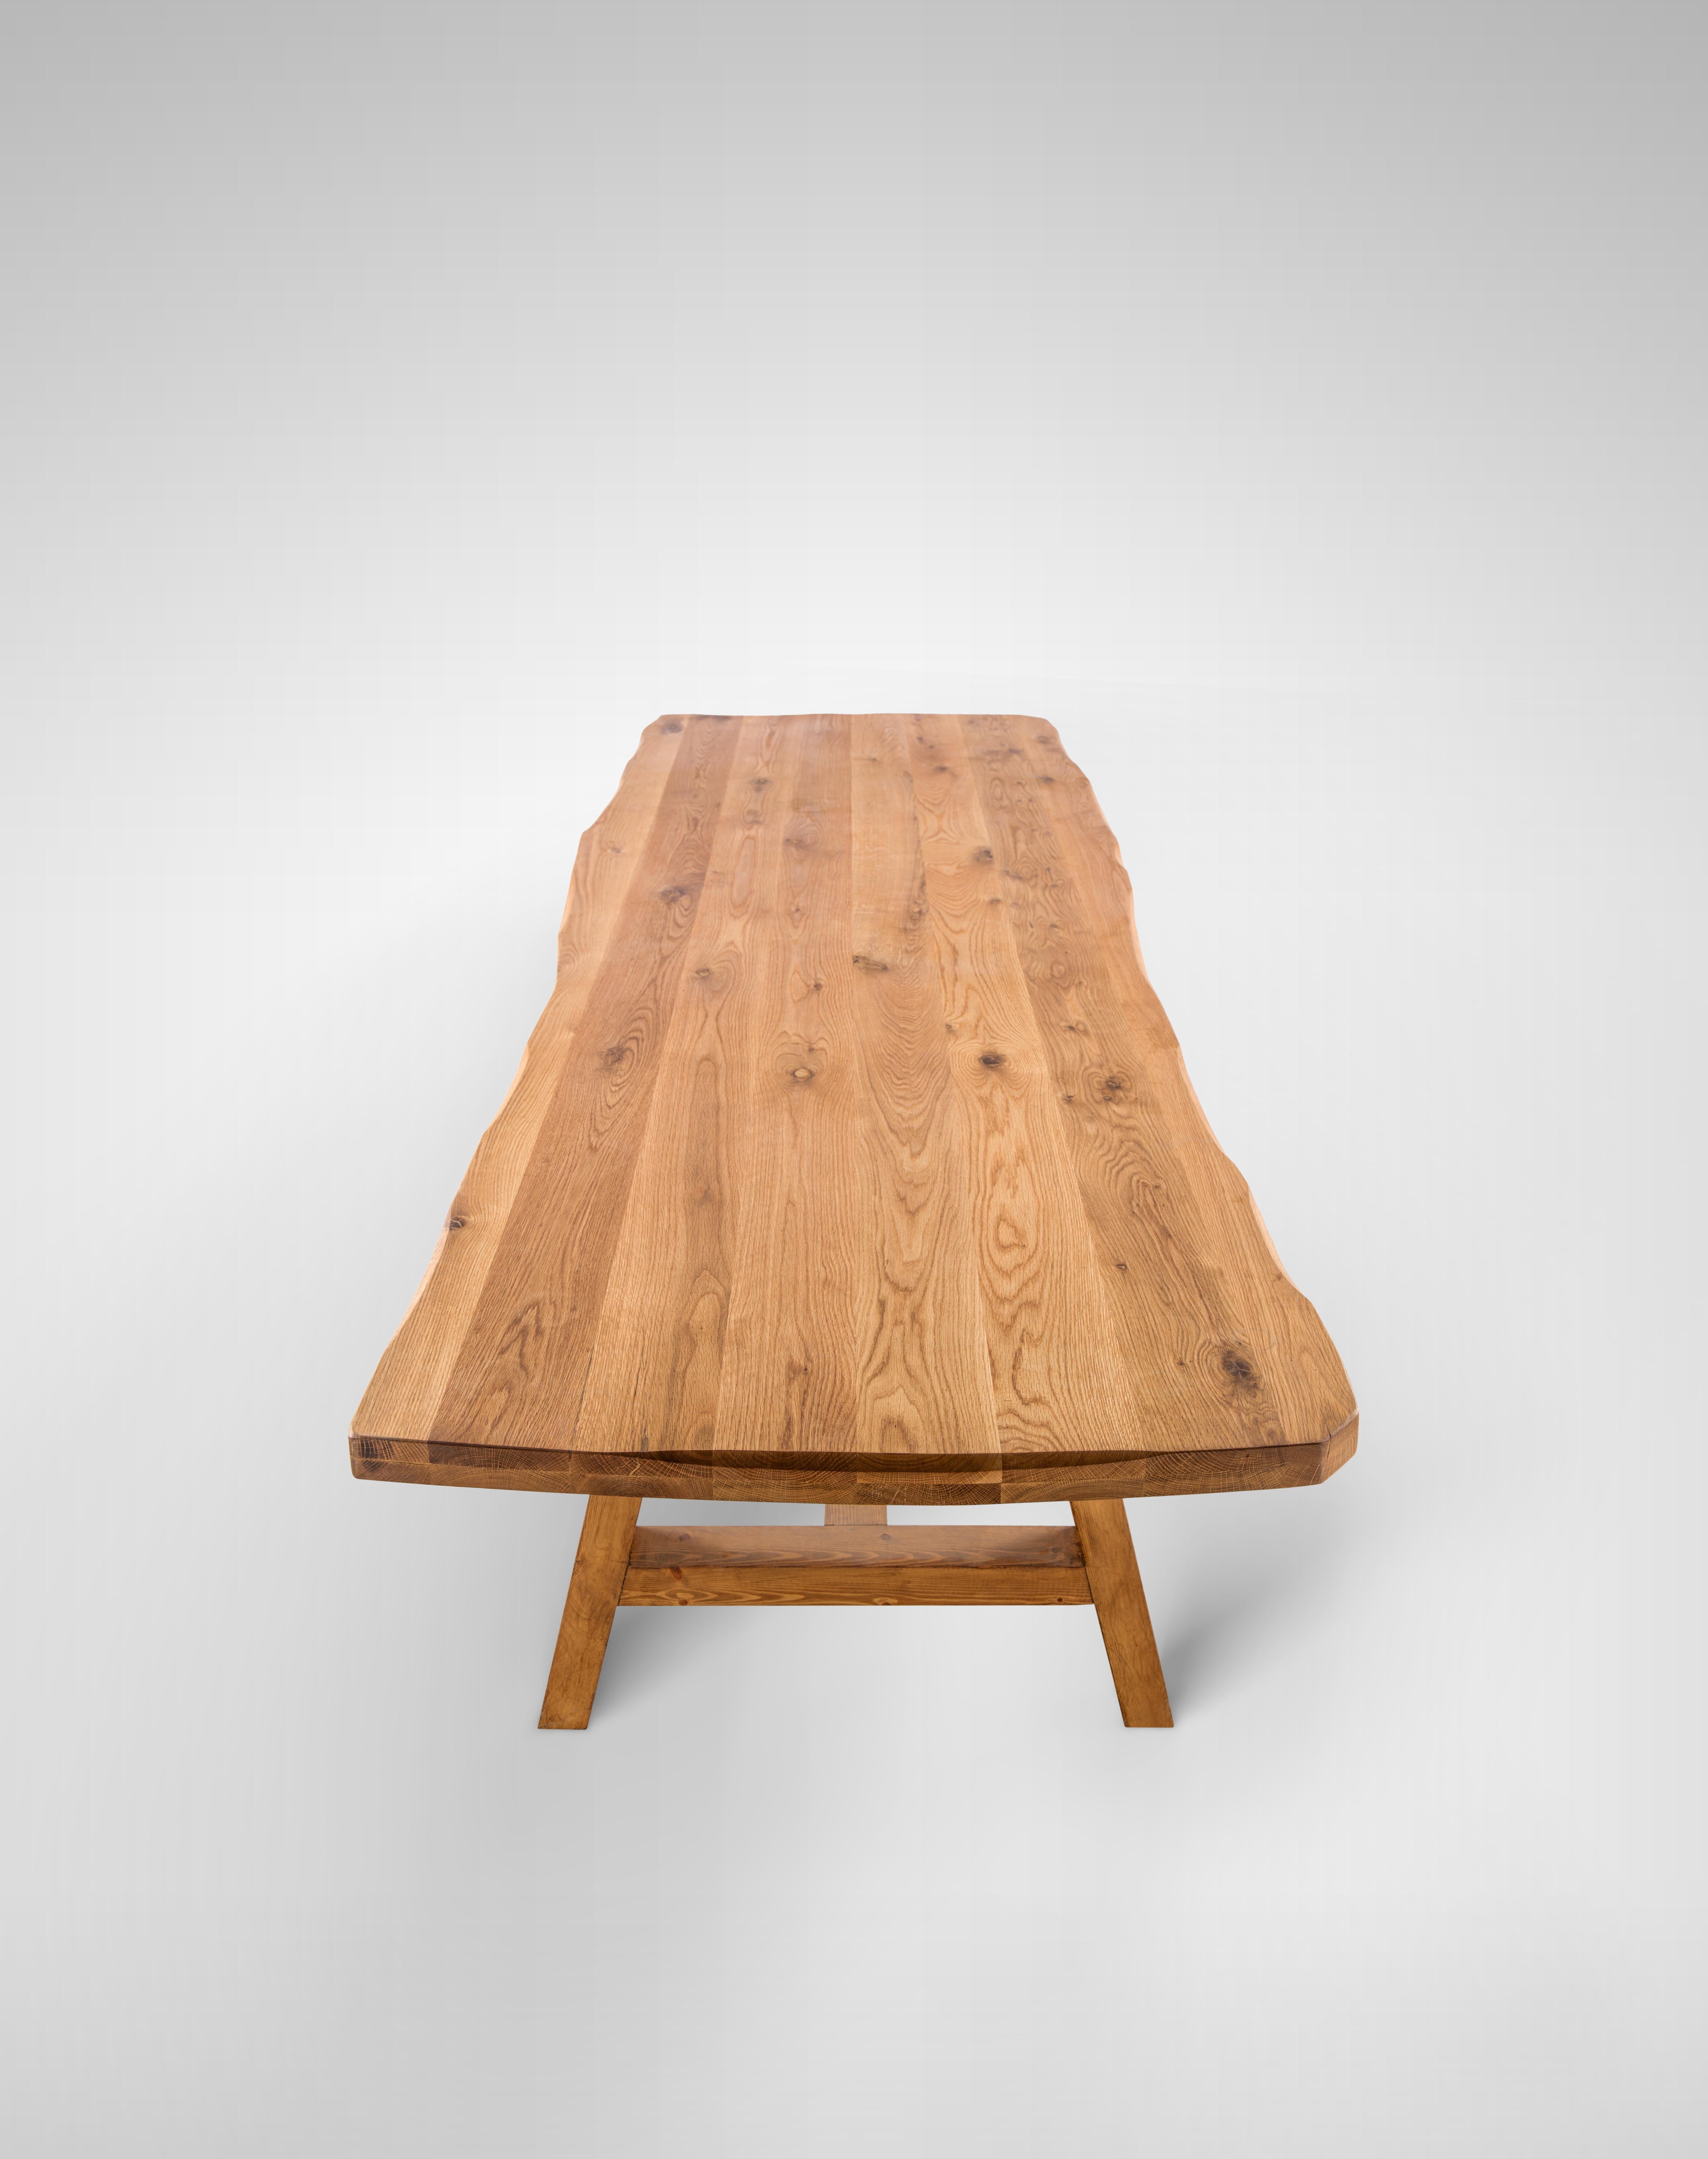 Outdoor dining table with Oil-Treated Massive Oak Logs Ideal for Large Families.
Gather up and share a fun meal while enjoying the beauty of summer joie de vivre. Our For The Love of Nature outdoor mega dining table is made from high quality